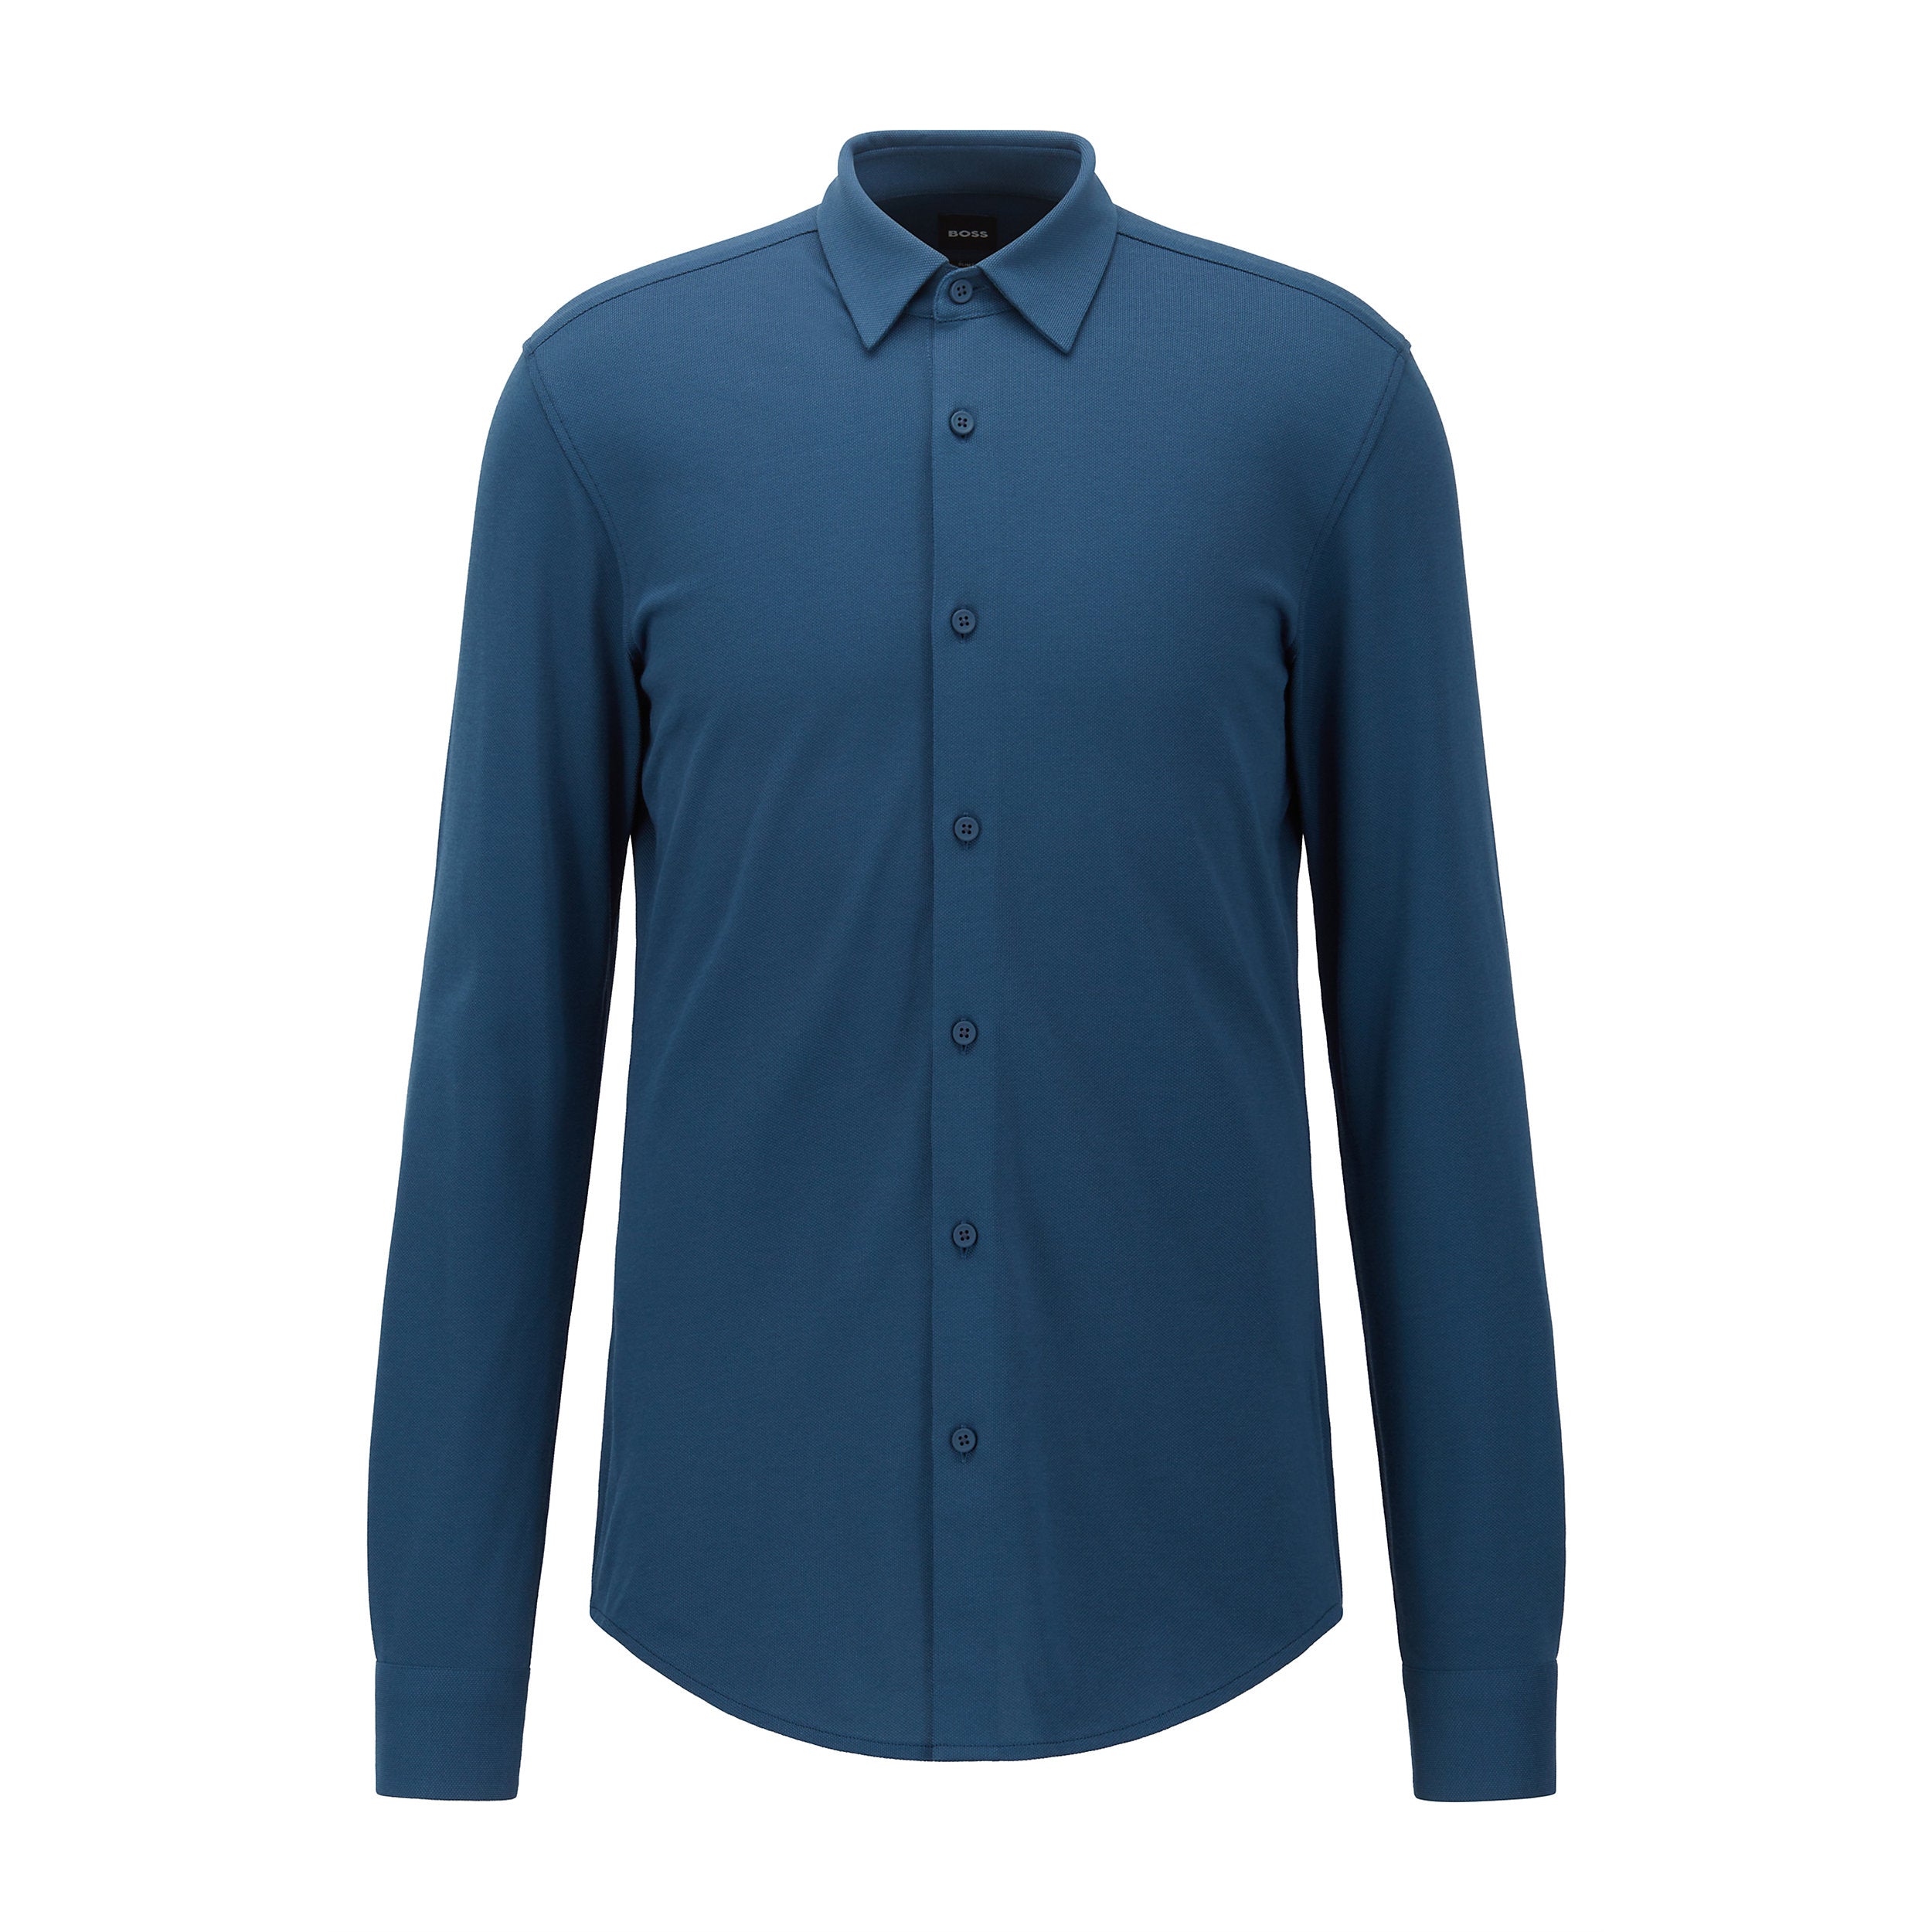 BOSS - ROAN Slim Fit Stretch Jersey Cotton Shirt in Navy Blue 50466802 413